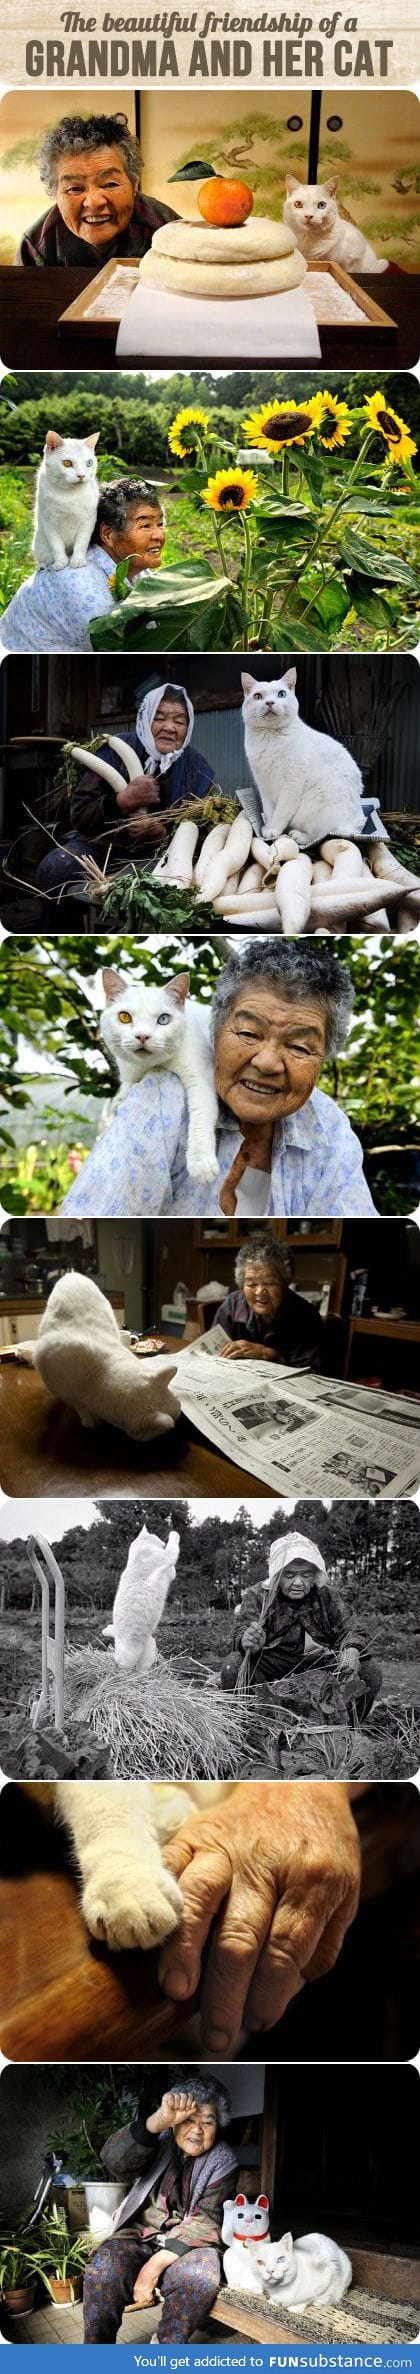 The beautiful friendship of a grandma and her cat